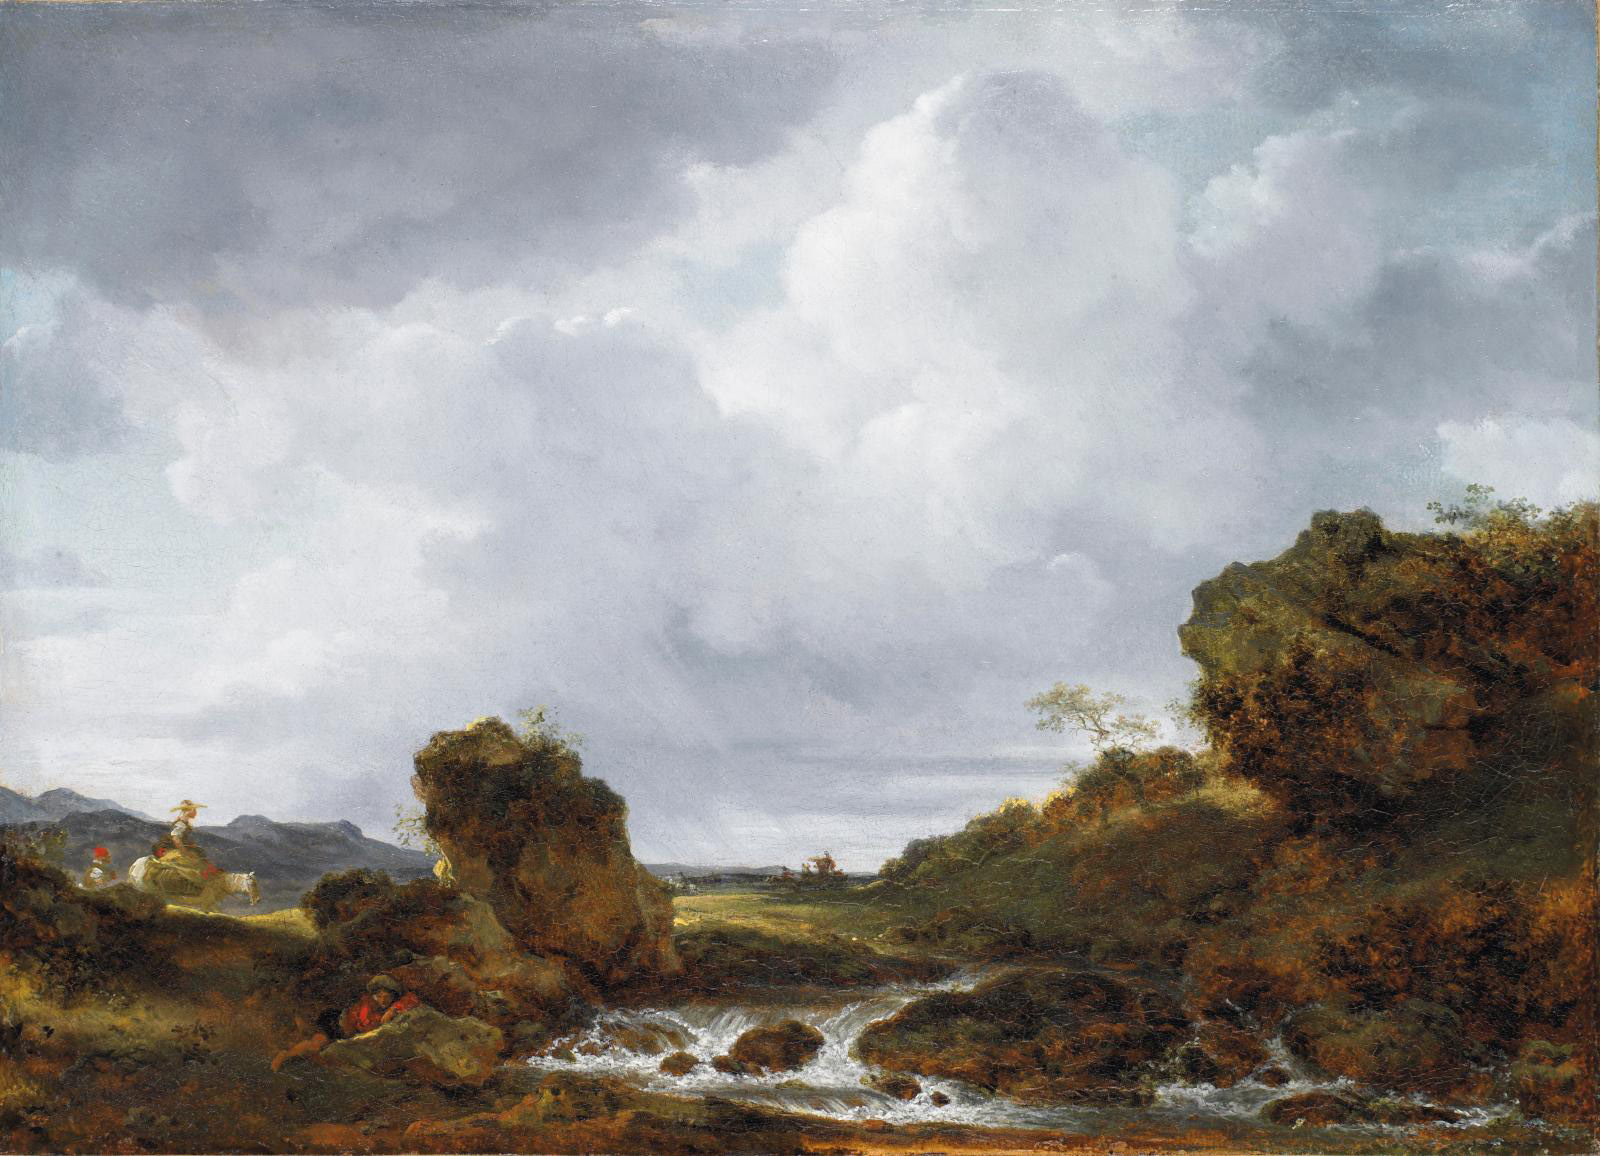 The Torrent, c. 1763-1773, oil on paper mounted on canvas, 27 x 37 cm/10.6 x 14.6 in.